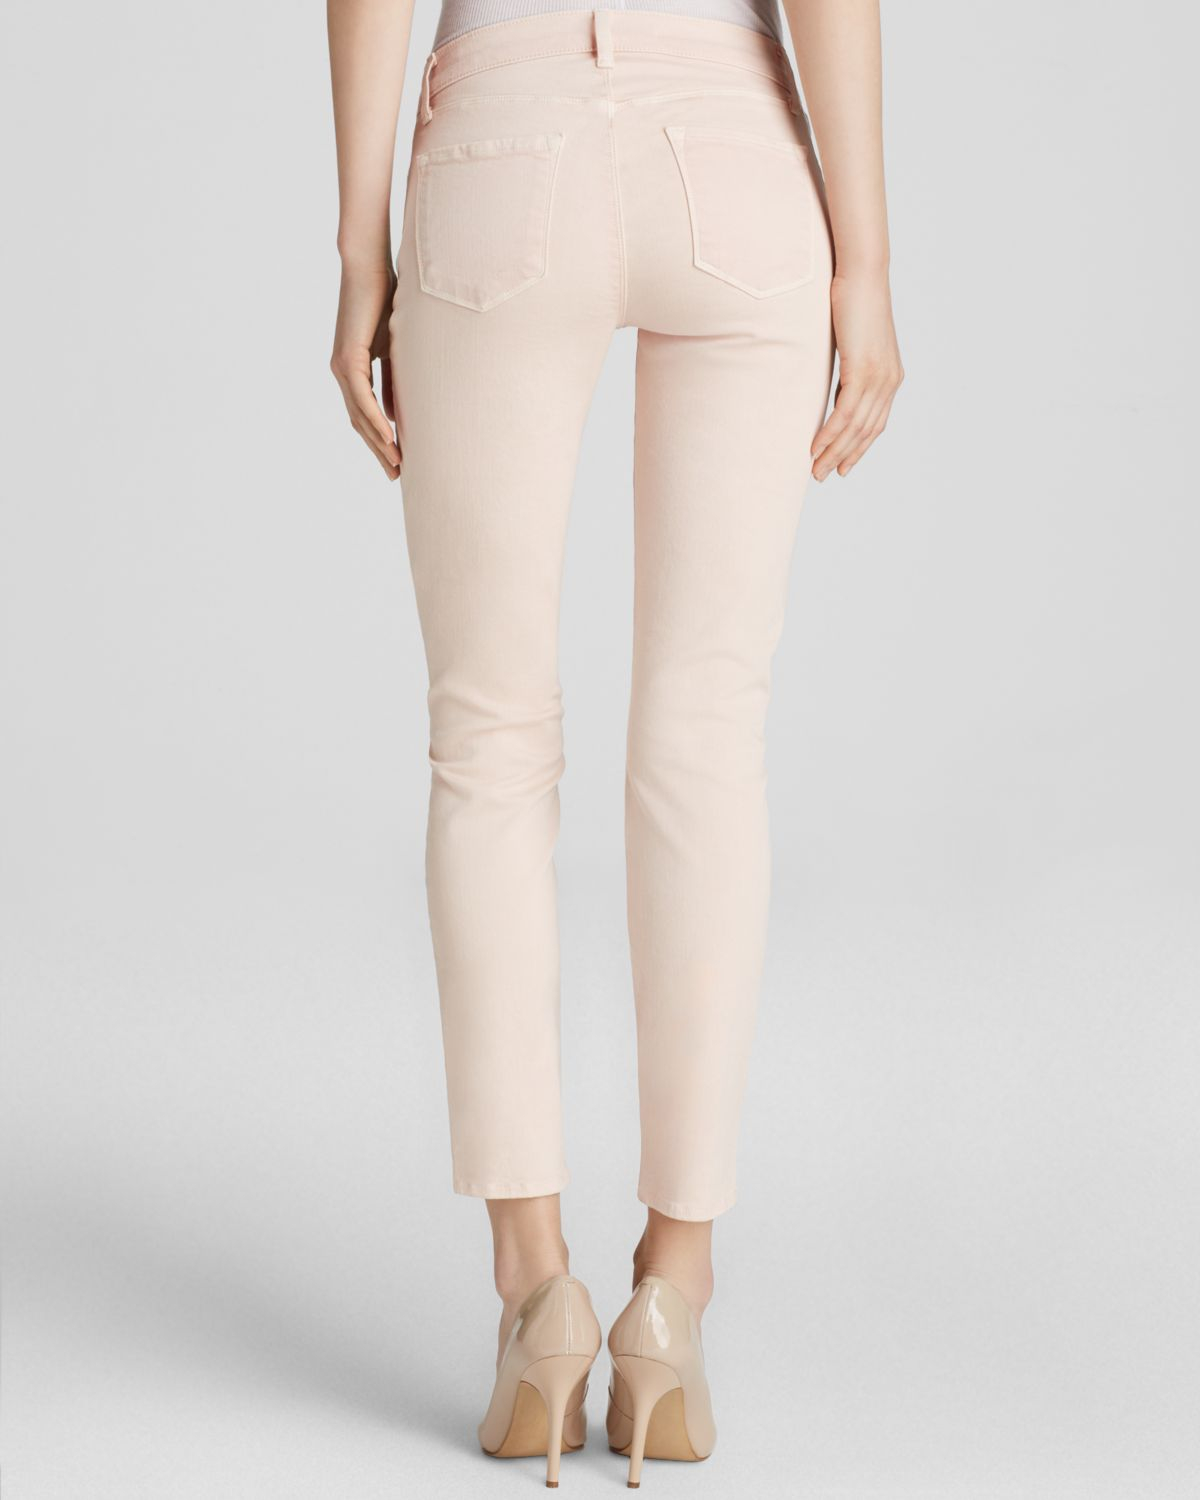 J brand Jeans - Photo Ready Low Rise Ankle Crop In Blush in Pink | Lyst